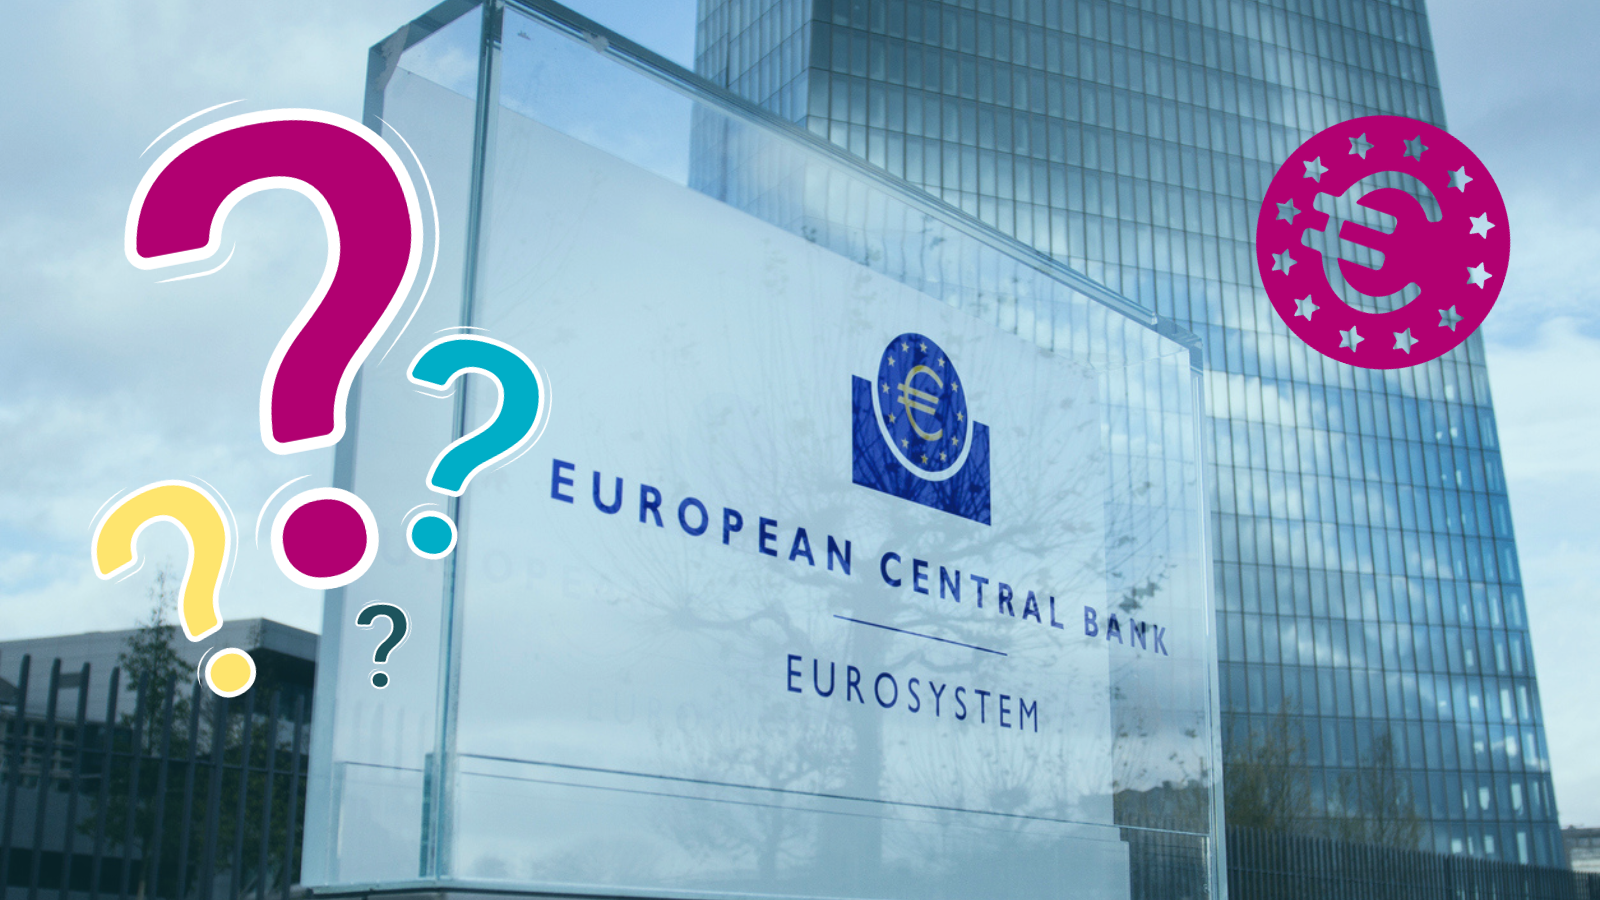 ecb building with question marks in background